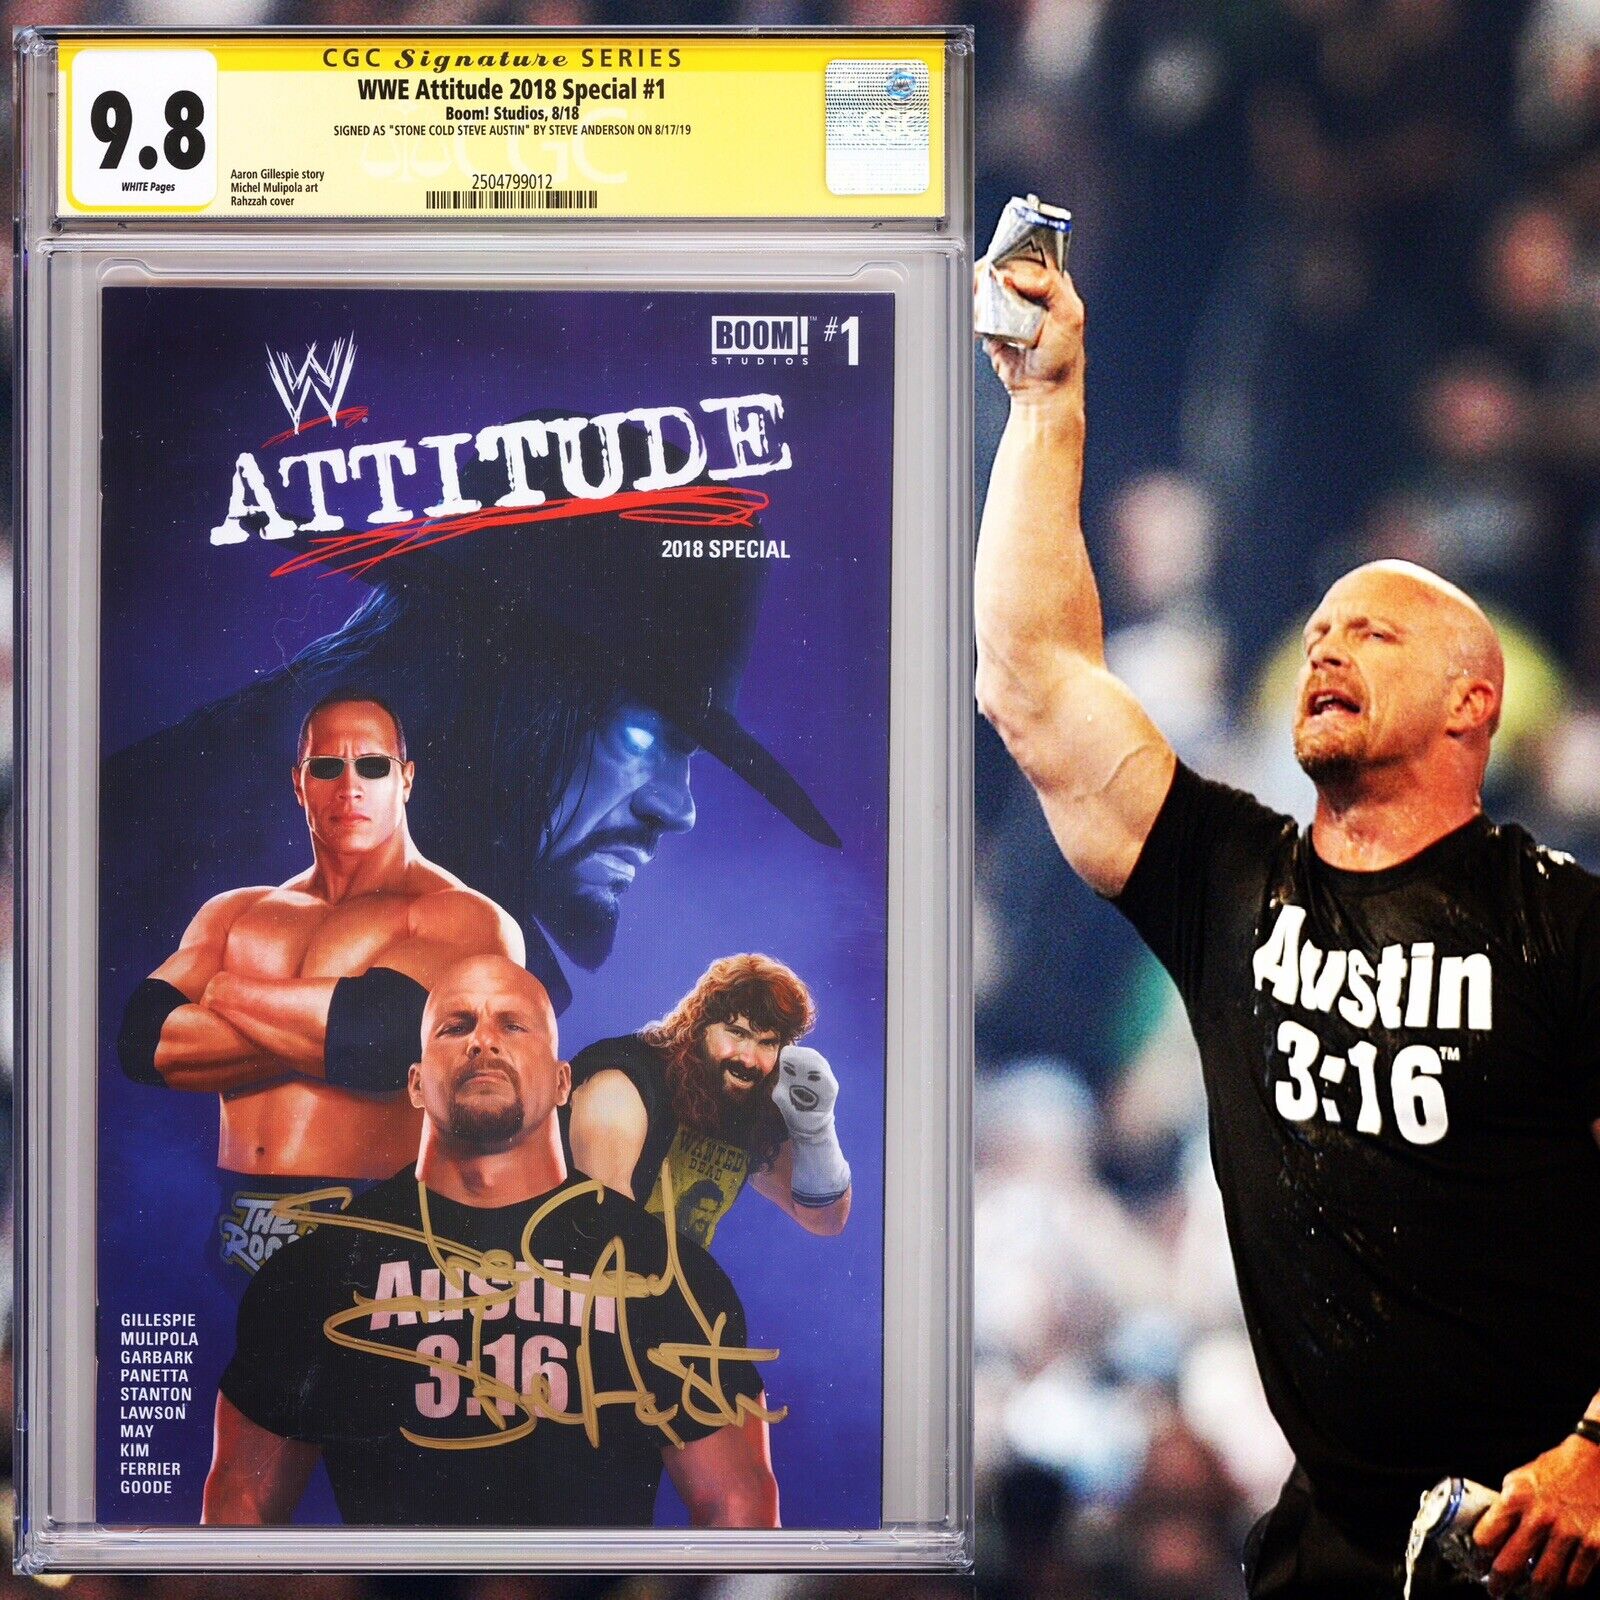 CGC SS 9.8 WWE Attitude 2018 Special #1 signed by Stone Cold Steve Austin